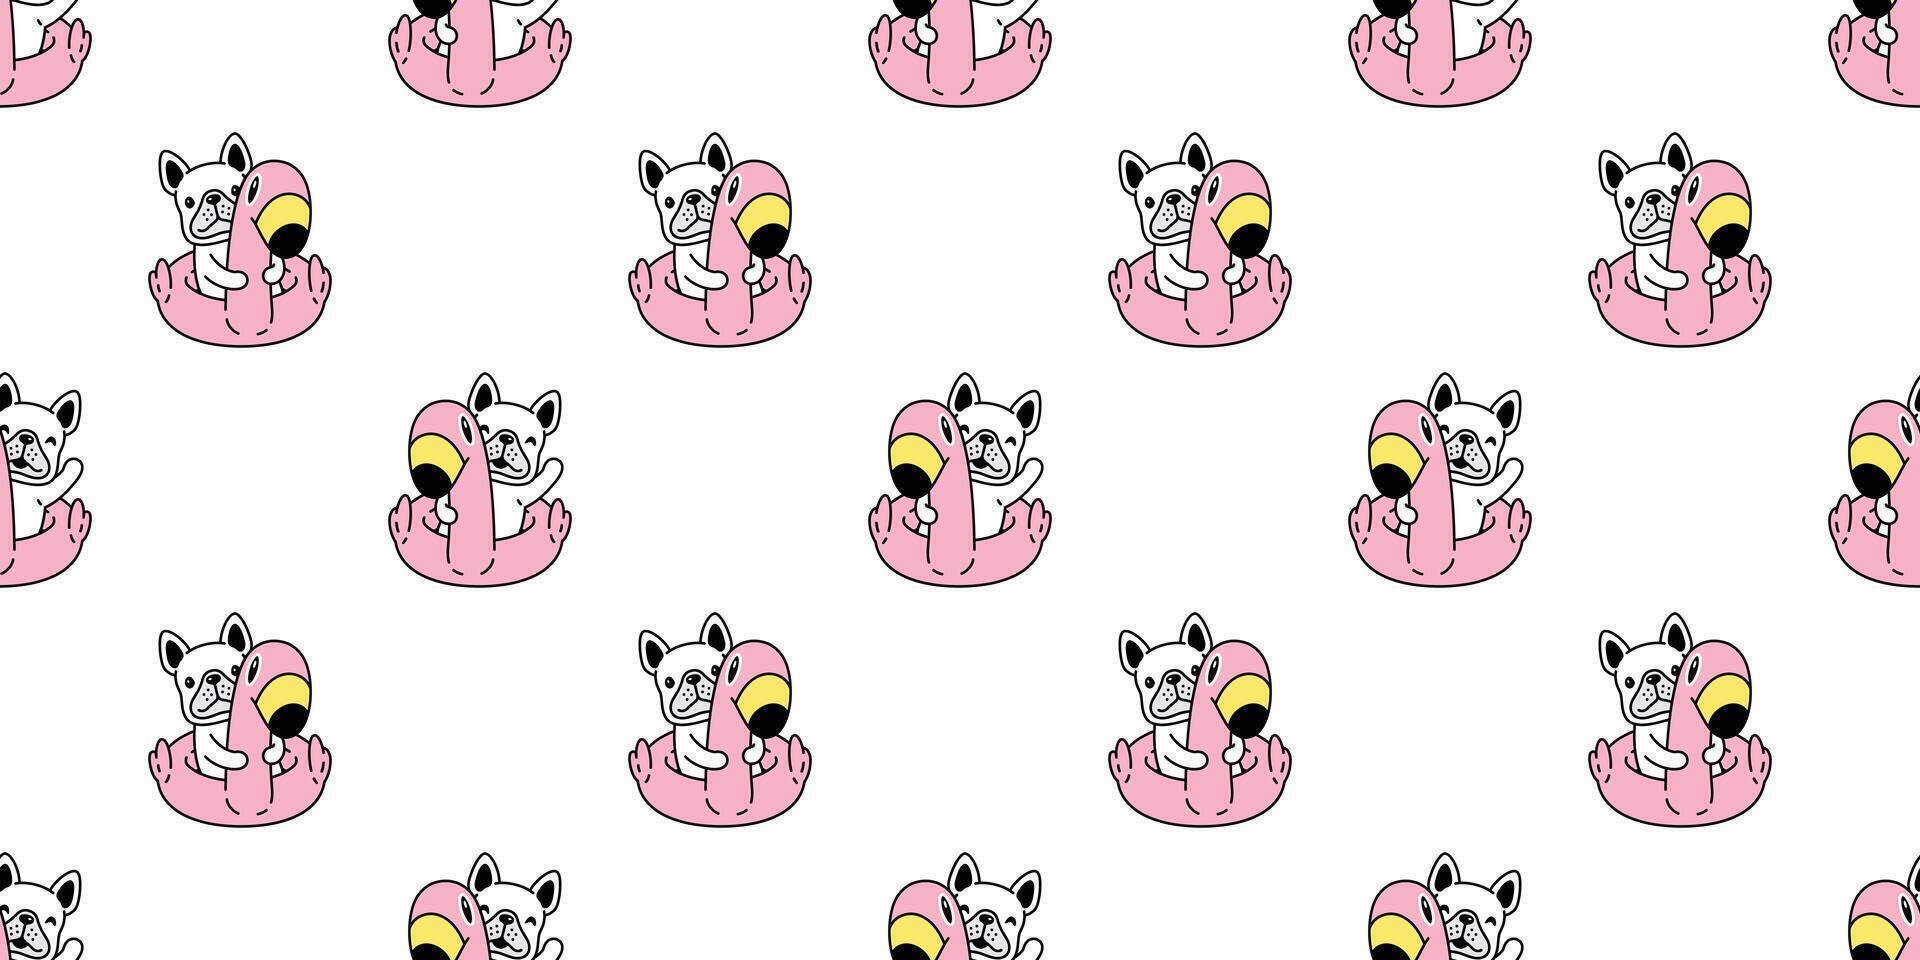 dog seamless pattern french bulldog swimming ring flamingo pool ocean beach puppy pet breed vector repeat wallpaper scarf isolated tile background cartoon animal doodle illustration white design